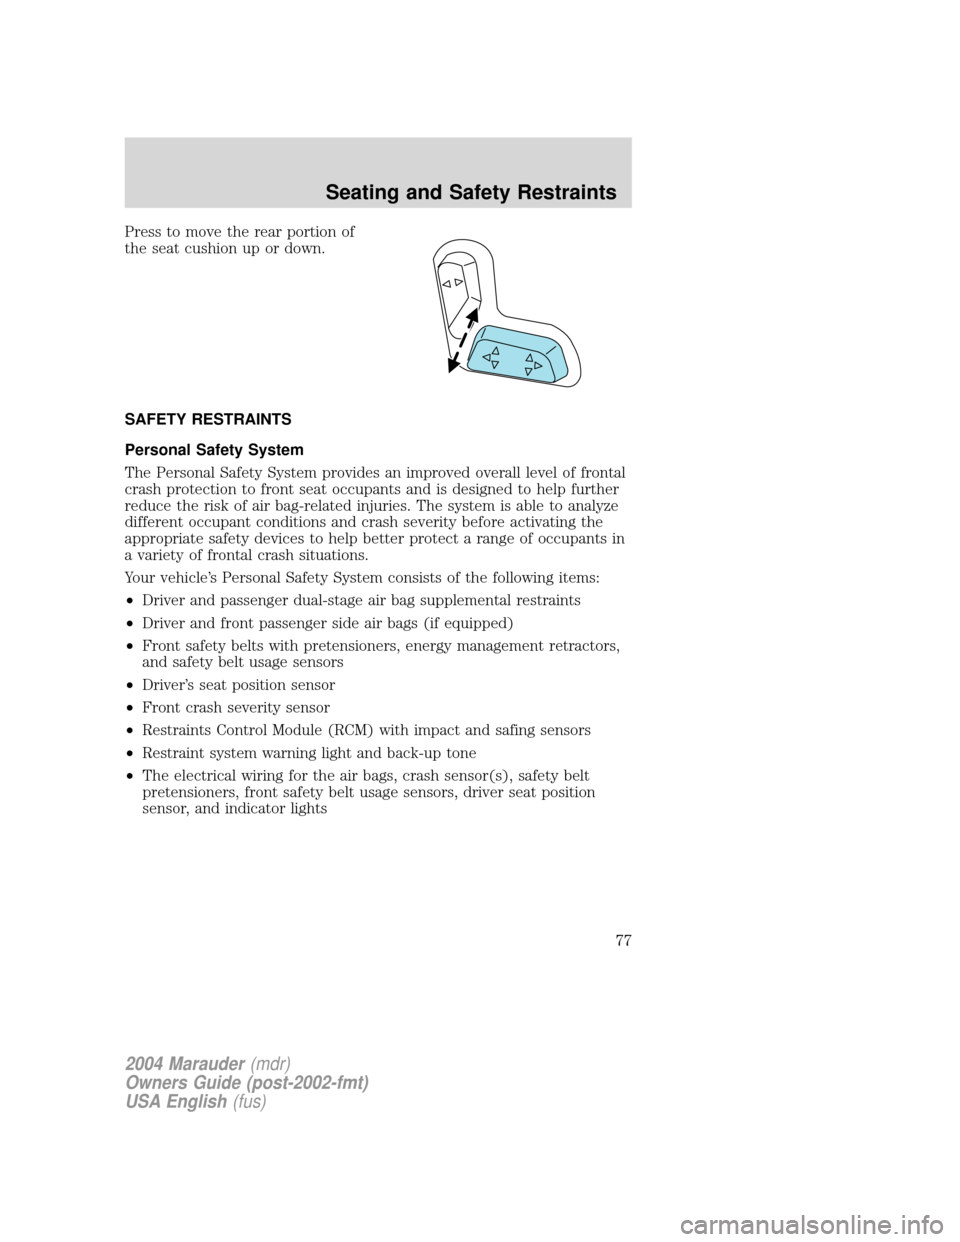 Mercury Marauder 2004  s Manual PDF Press to move the rear portion of
the seat cushion up or down.
SAFETY RESTRAINTS
Personal Safety System
The Personal Safety System provides an improved overall level of frontal
crash protection to fro